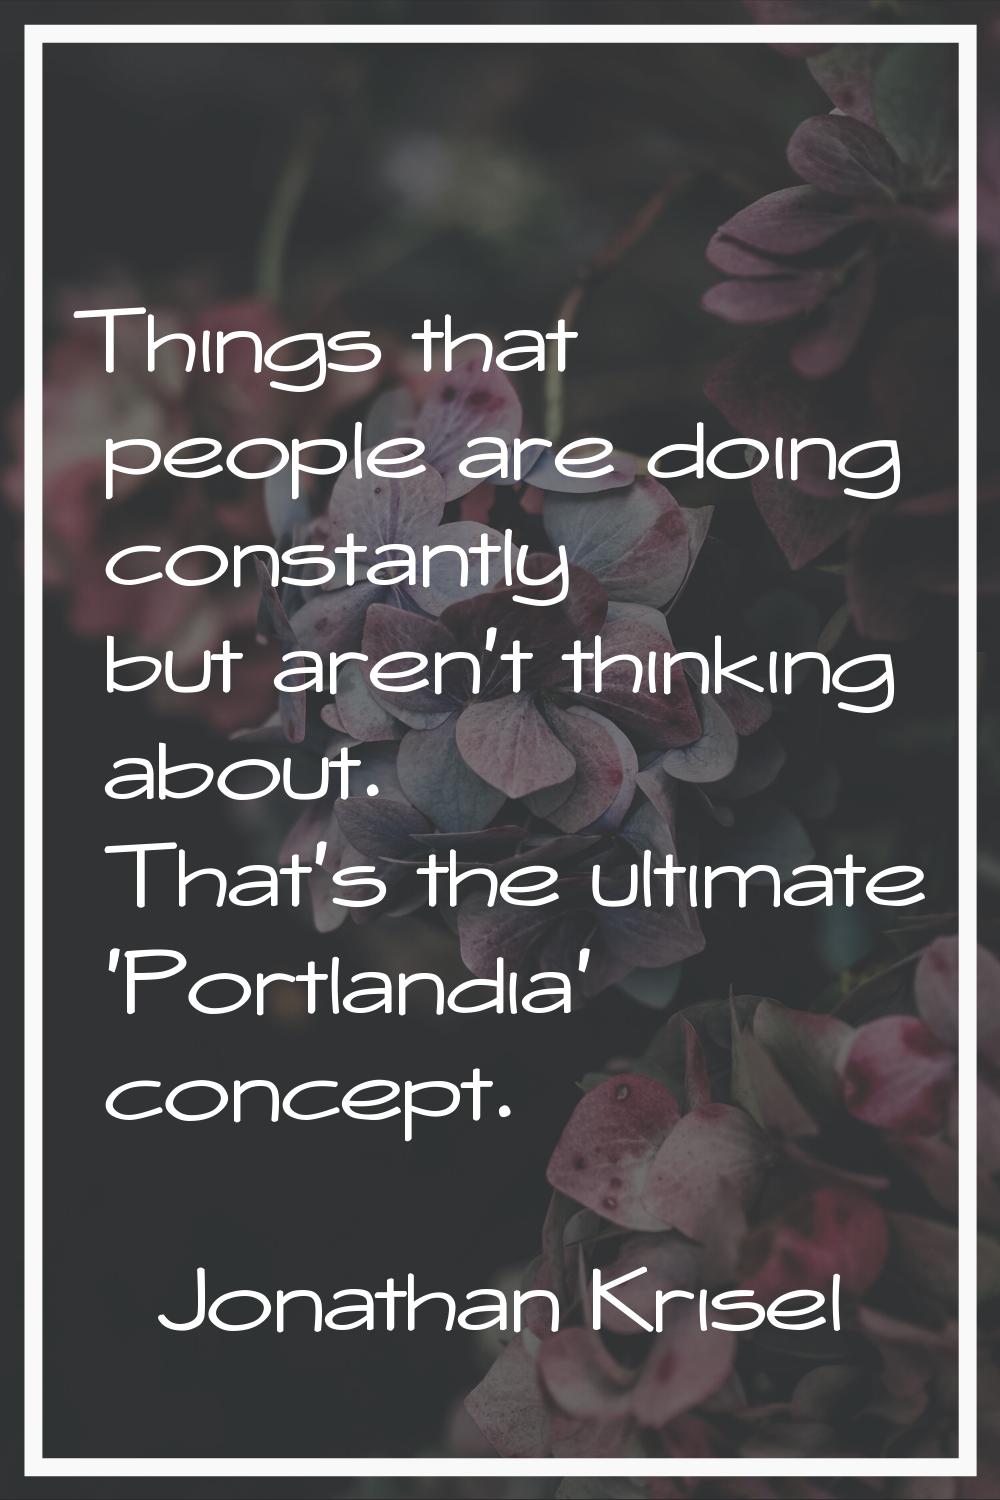 Things that people are doing constantly but aren't thinking about. That's the ultimate 'Portlandia'